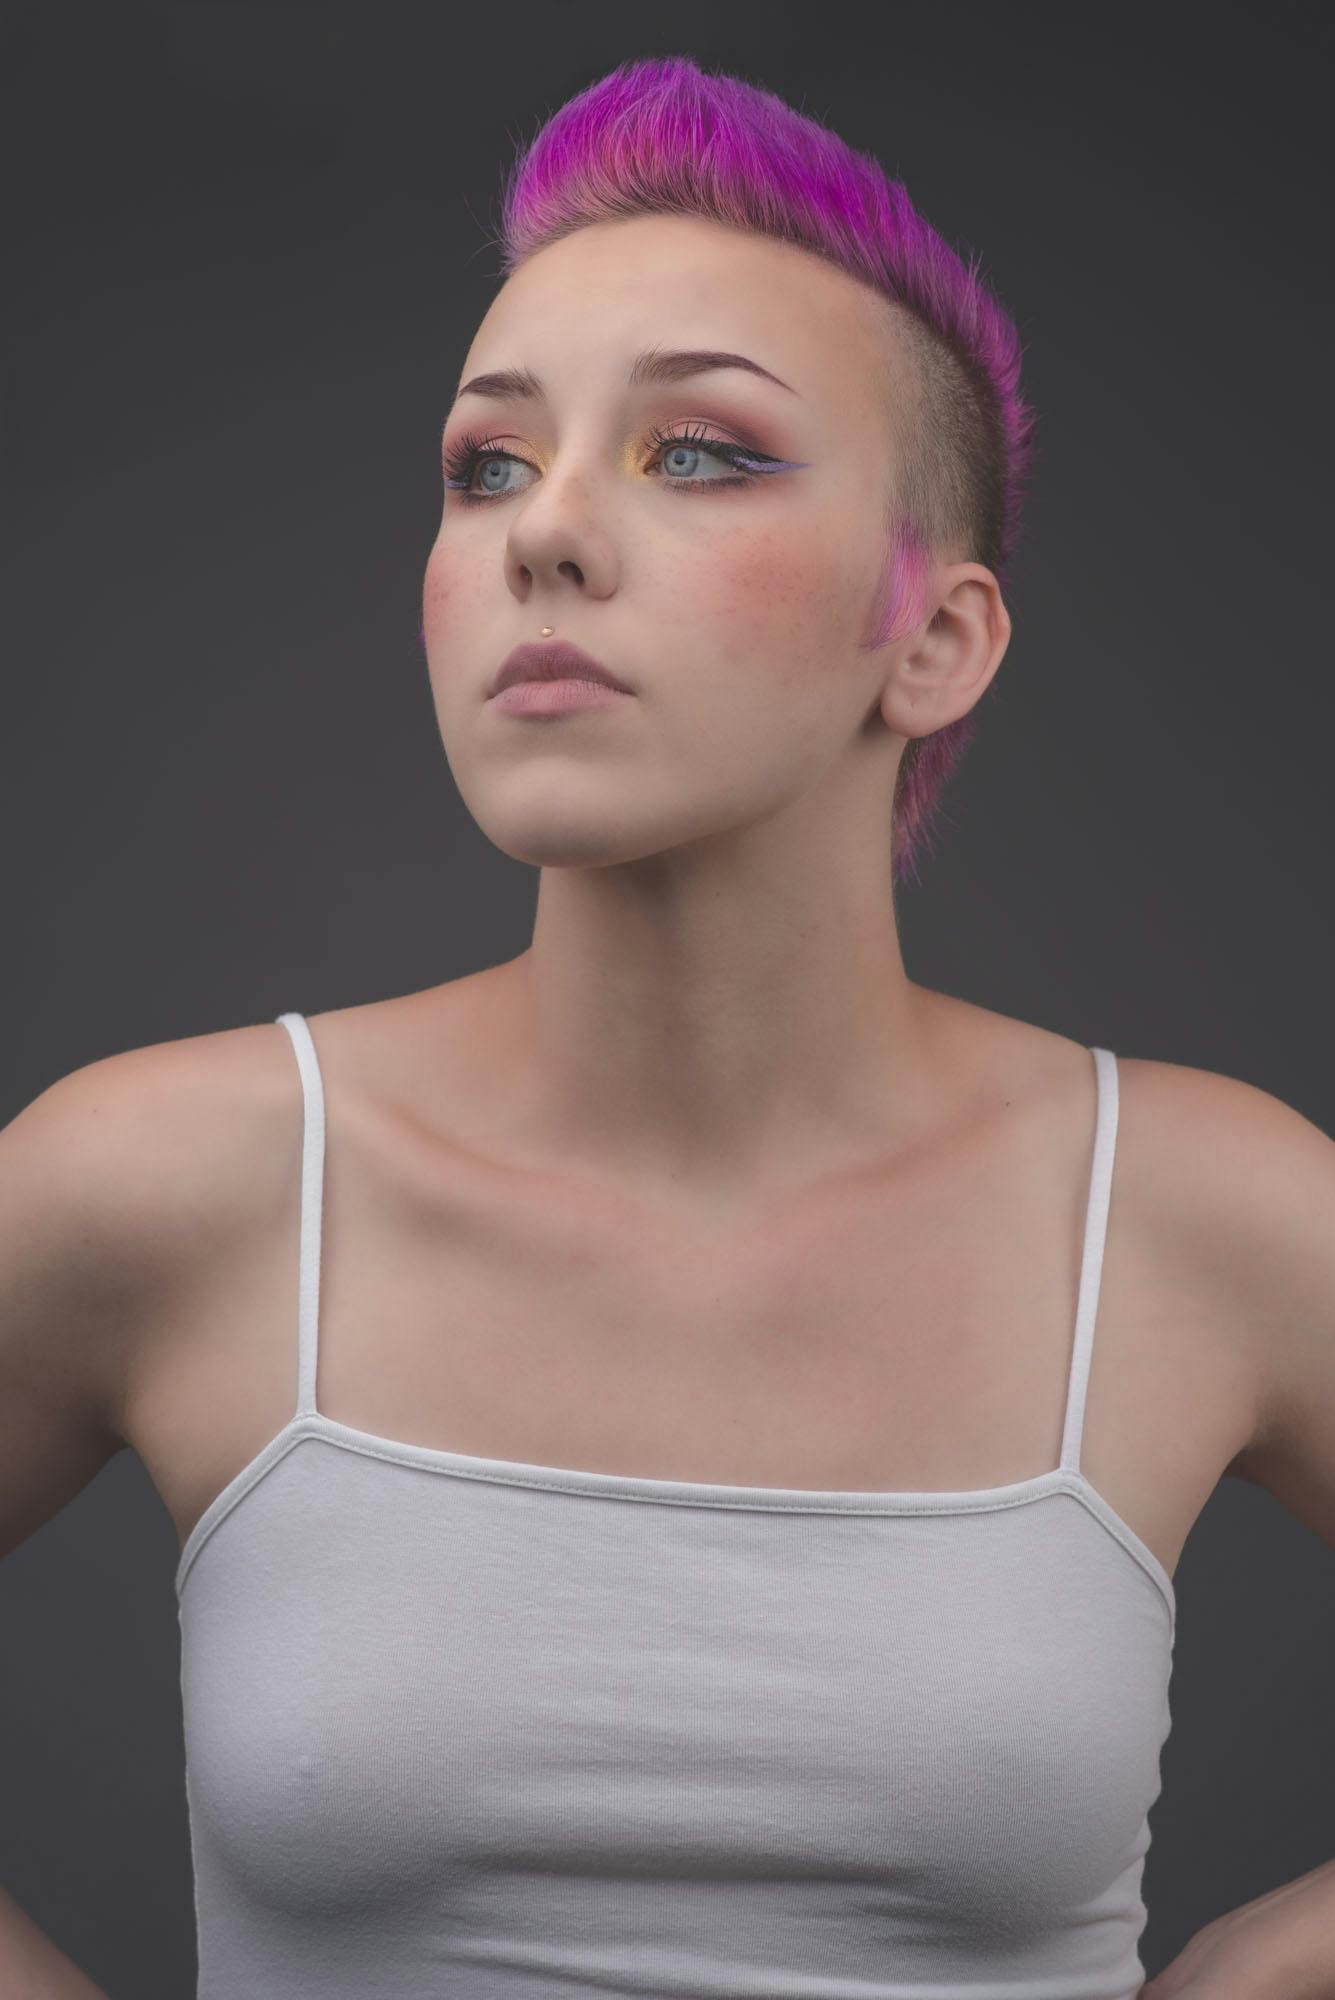 a portrait of Marybeth wearing a white tank top and a purple pink mohawk styled hairdo.